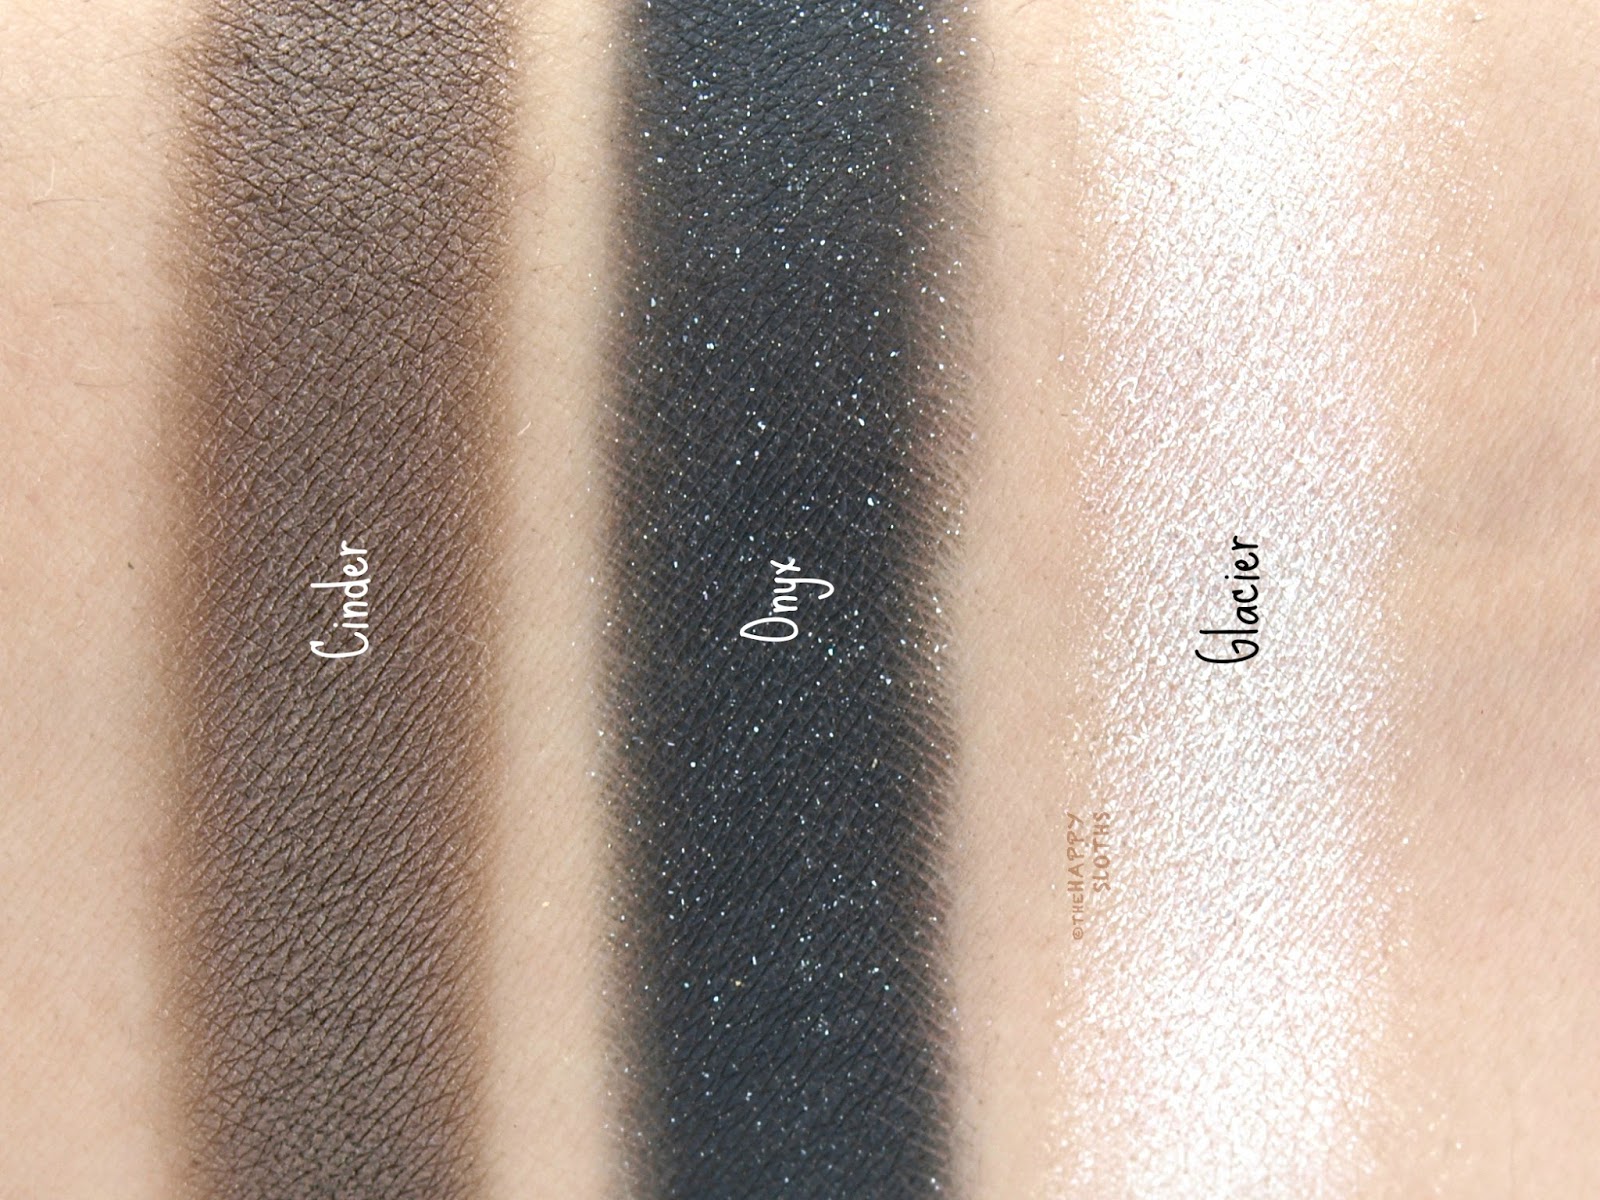 Kat Von D | Shade + Light Glimmer Eye Contour Palette: Review and Swatches